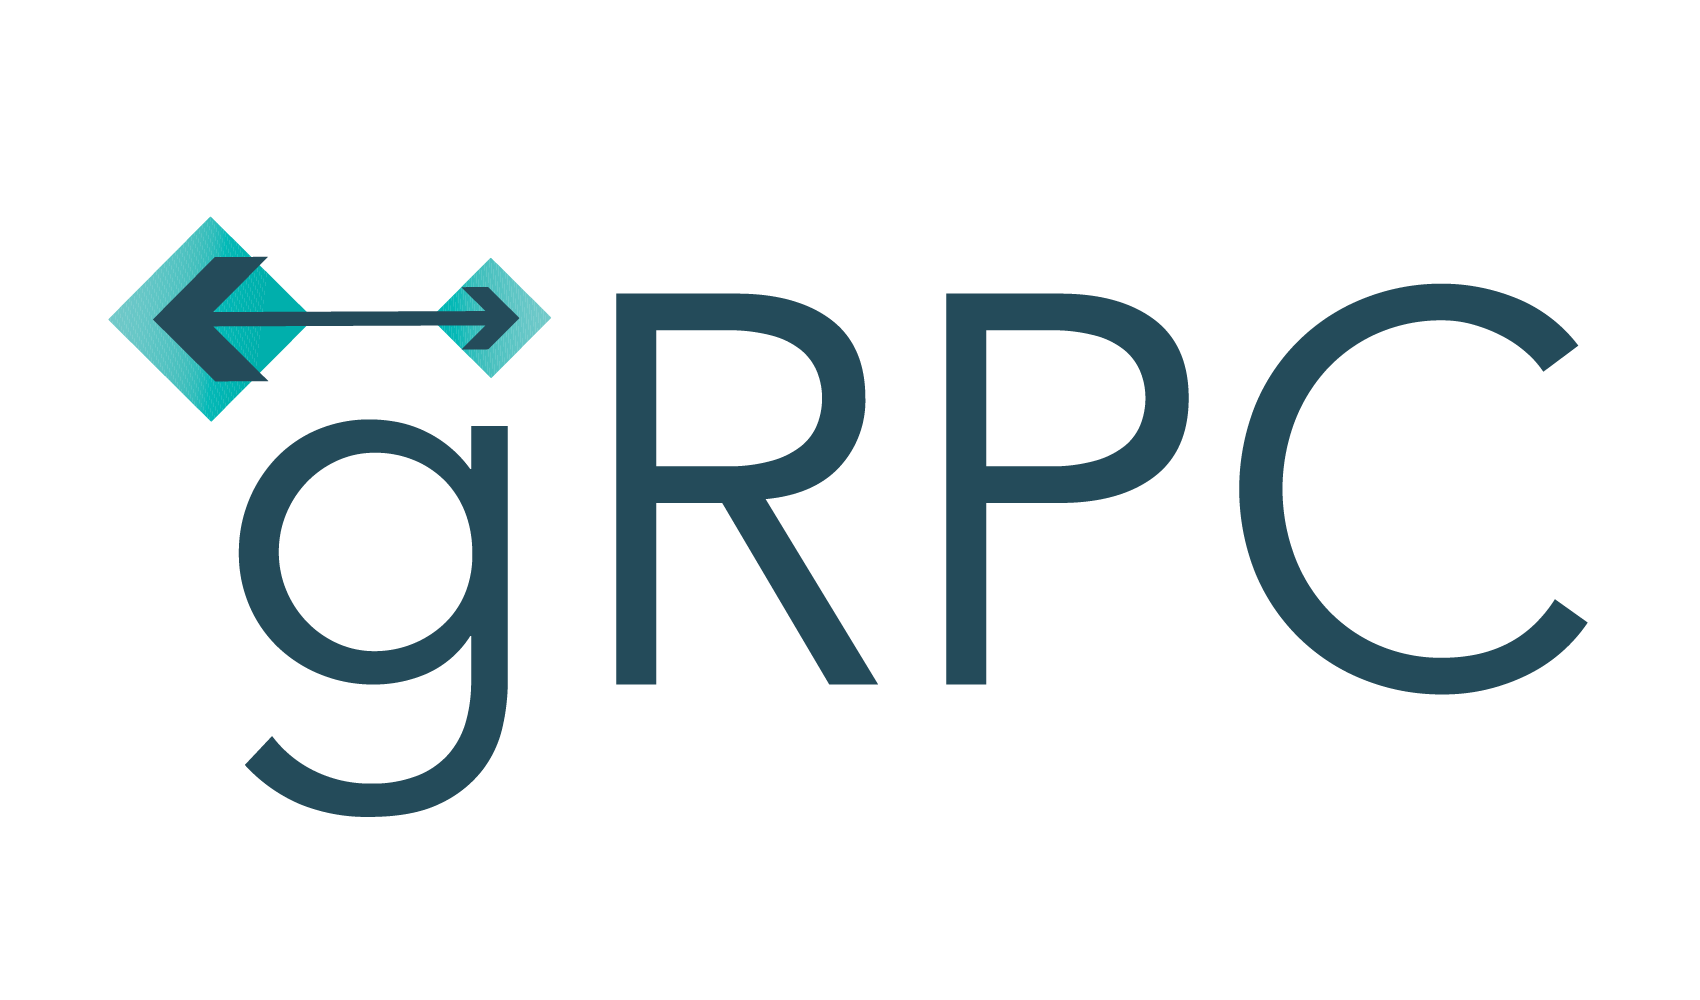 What's new for gRPC in .NET 6